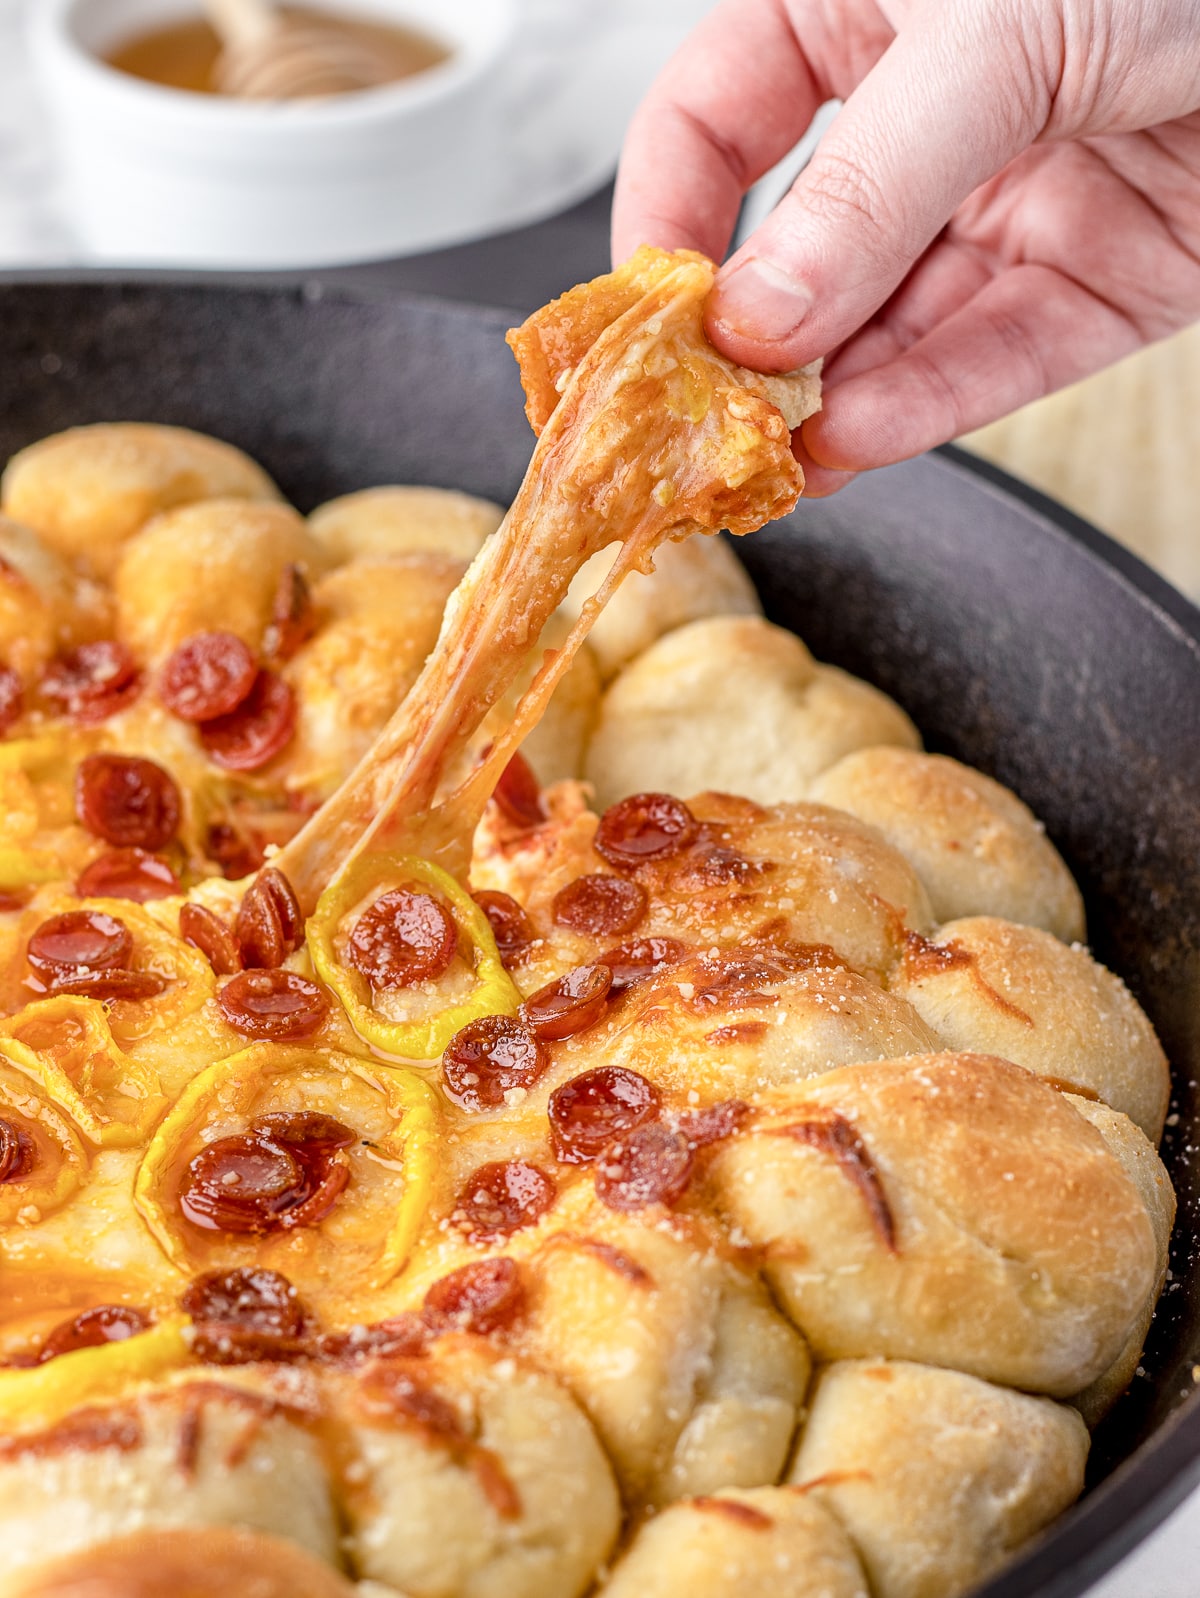 A hand pulling a pizza dough ball from the cheesy pizza dip.